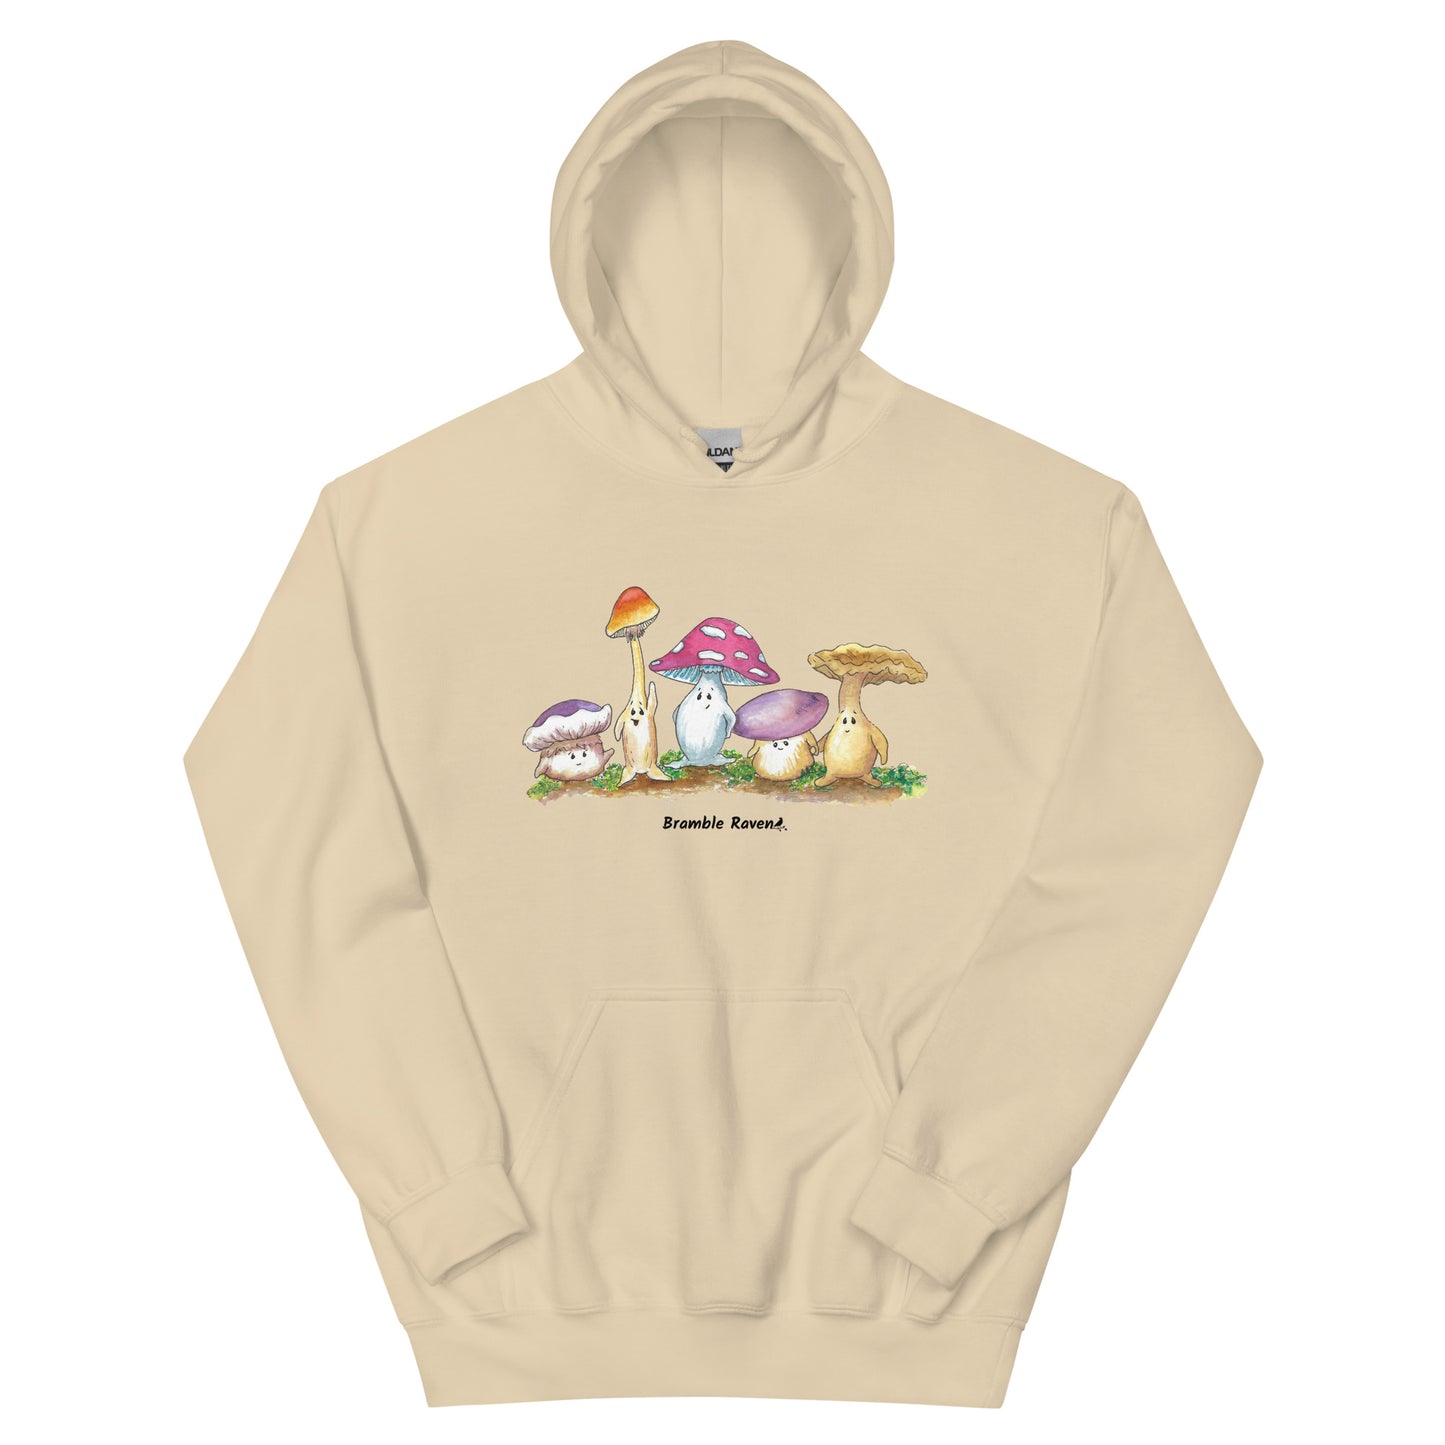 Sand colored unisex cotton/polyester blend hoodie. Features front design of Mushy and his whimsical mushroom friends. Hoodie has double lined hood, front pouch pocket, rib knit cuffs and stretchy waistband.